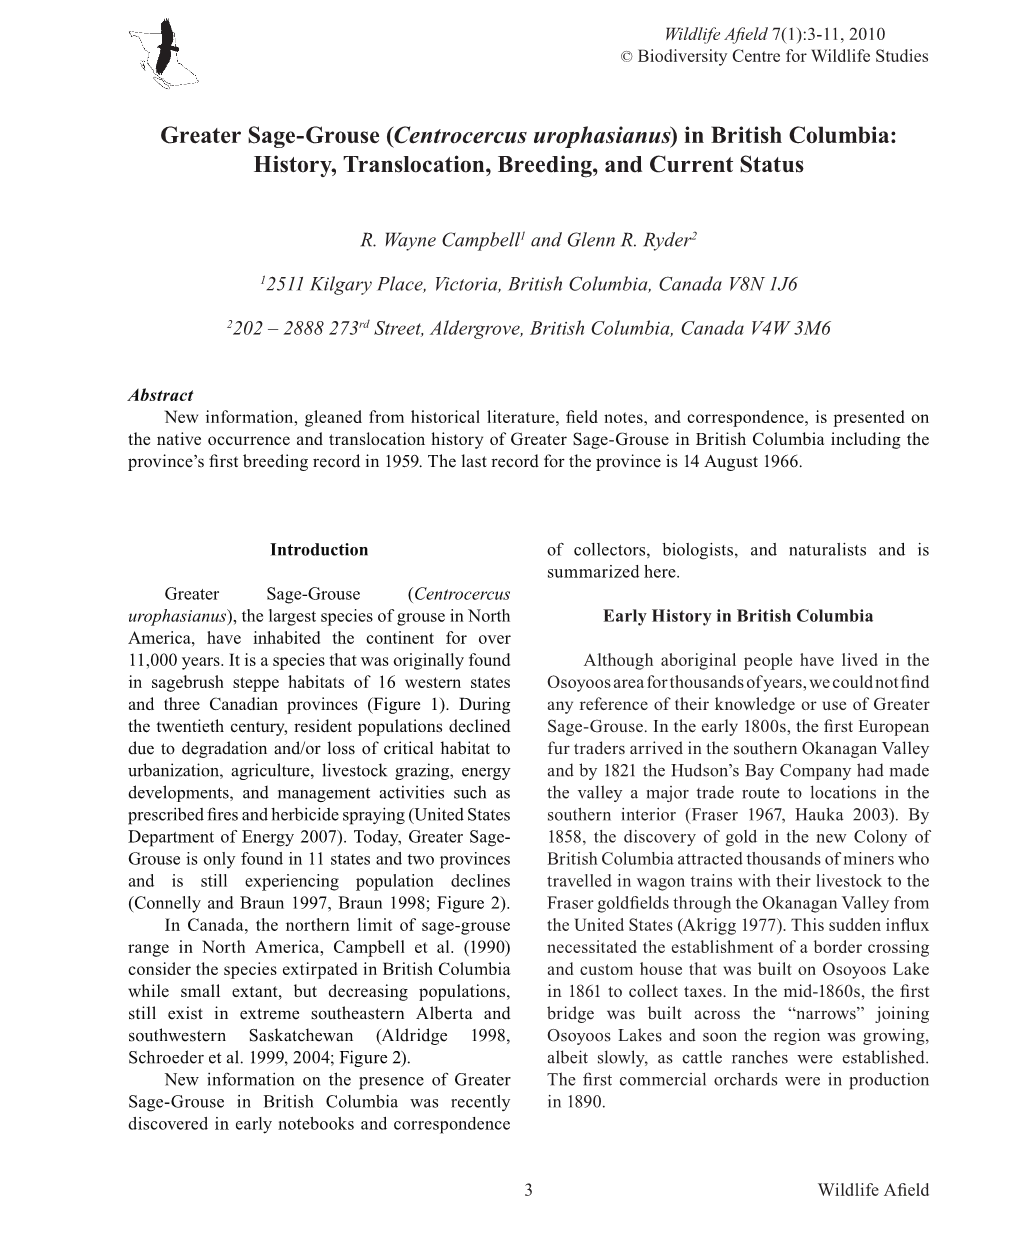 Greater Sage-Grouse (Centrocercus Urophasianus) in British Columbia: History, Translocation, Breeding, and Current Status